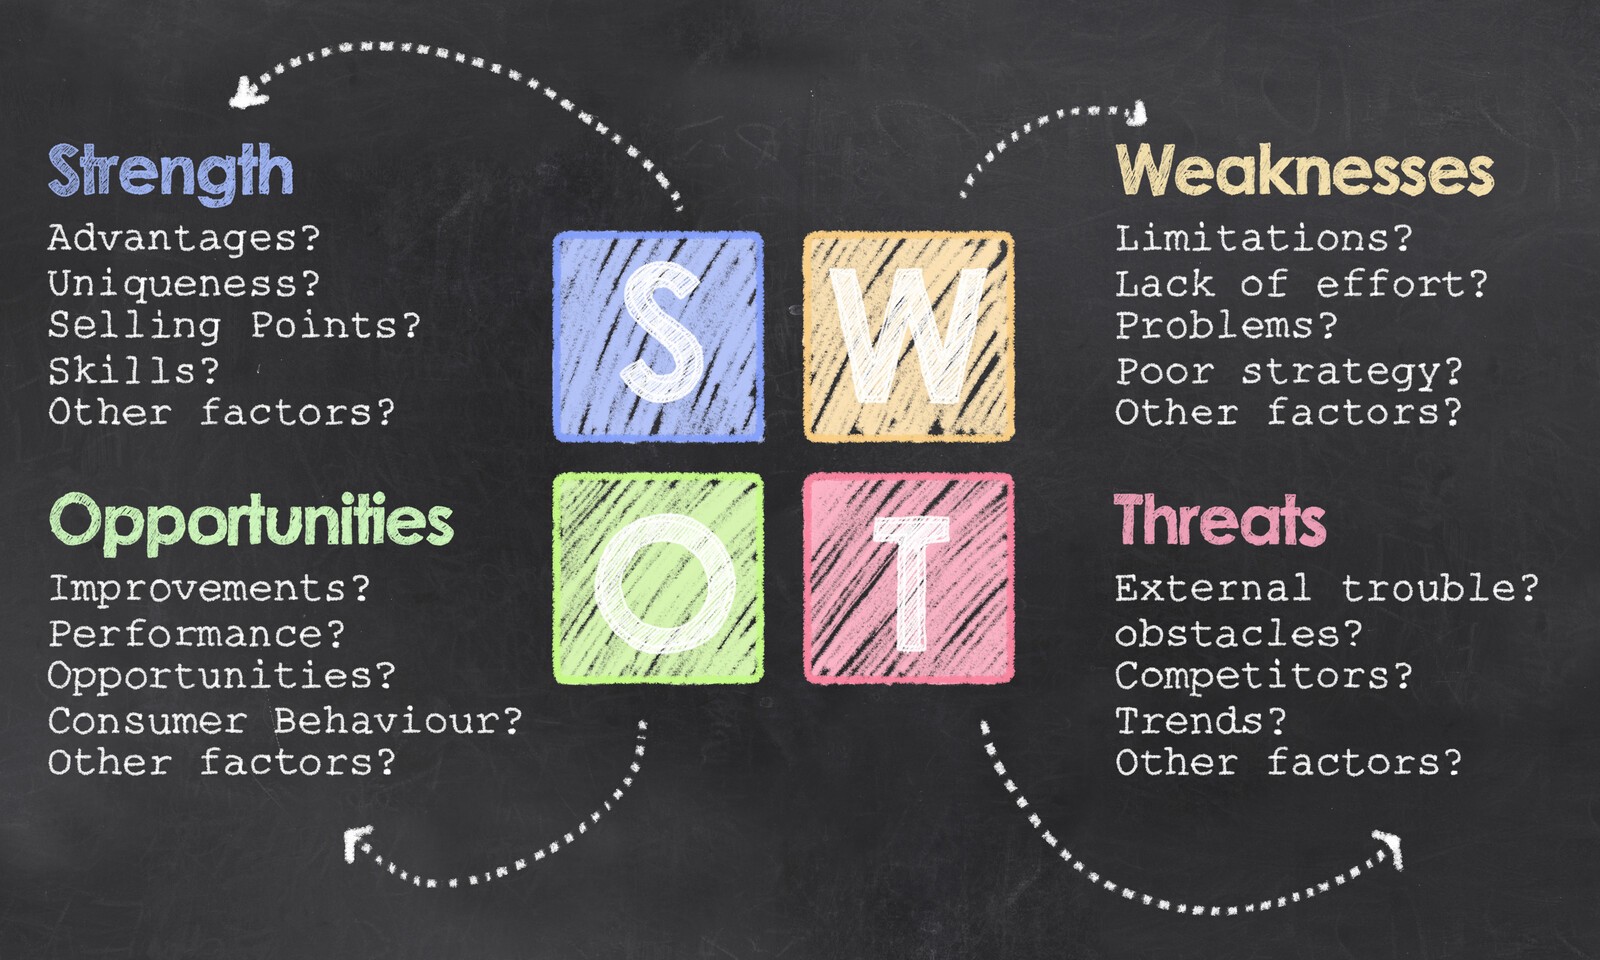 SWOT analysis (Strengths, Weaknesses, Opportunities, and Threats)